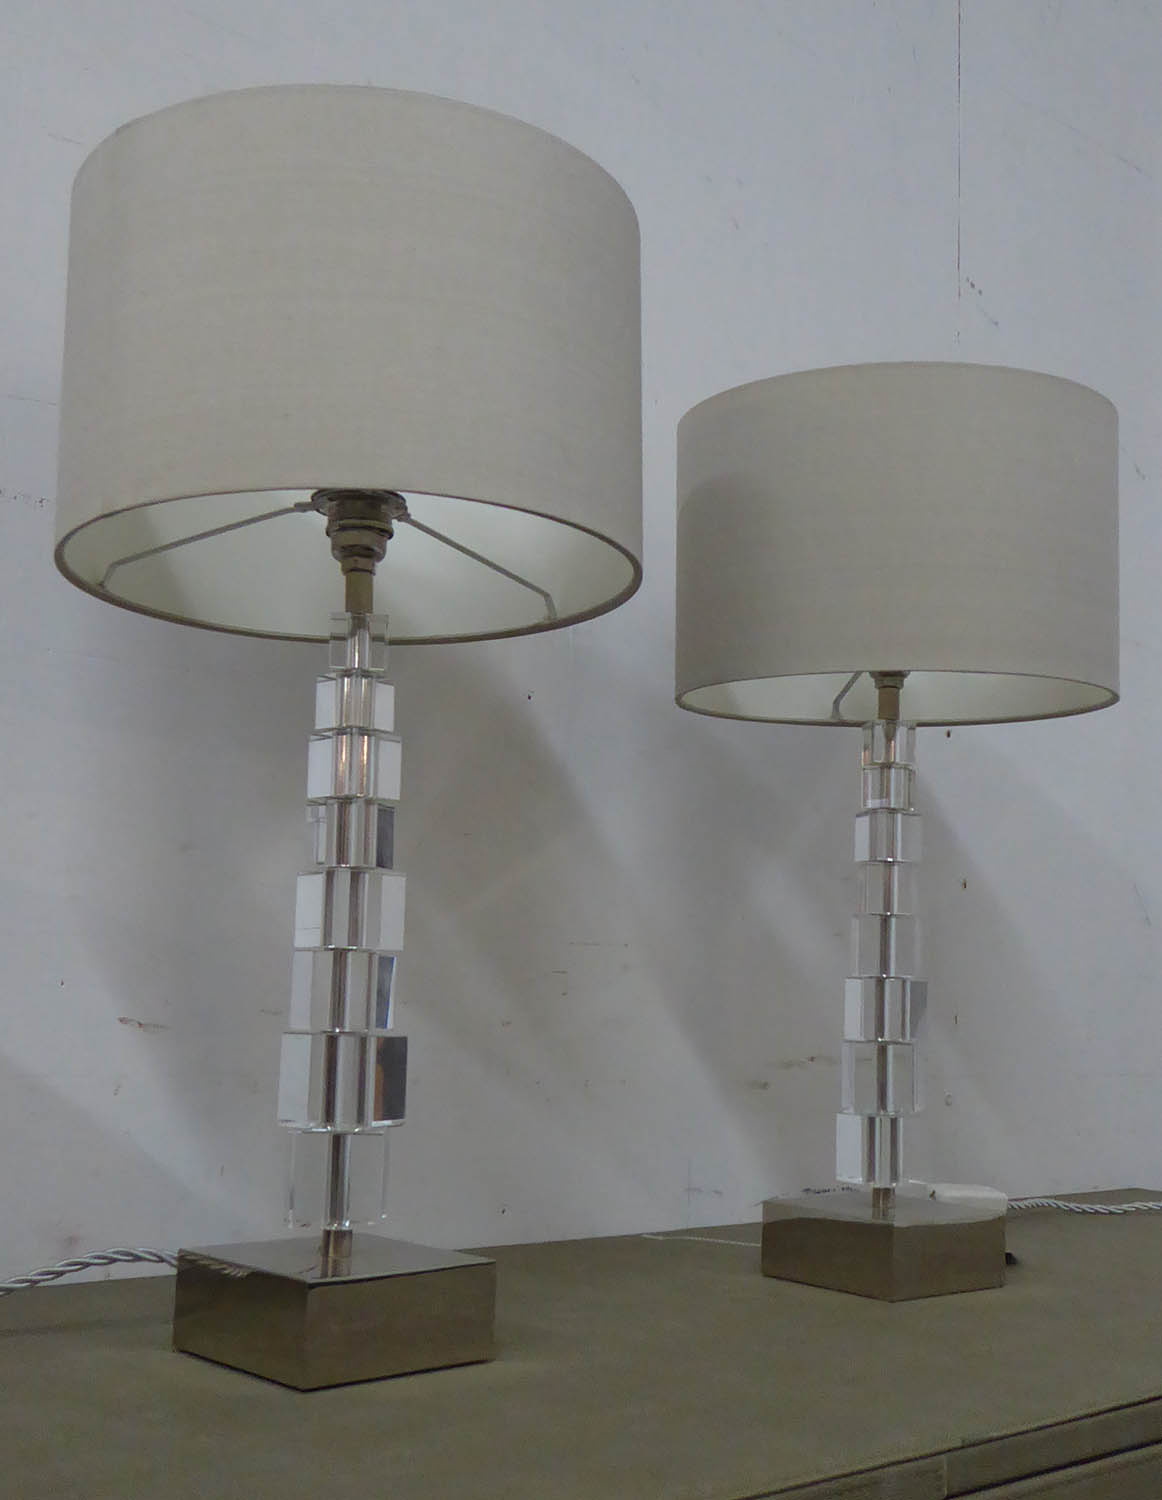 PORTA ROMANA LARTIGUE TABLE LAMPS, a pair, with shades, 50cm H. (2) - Image 4 of 8